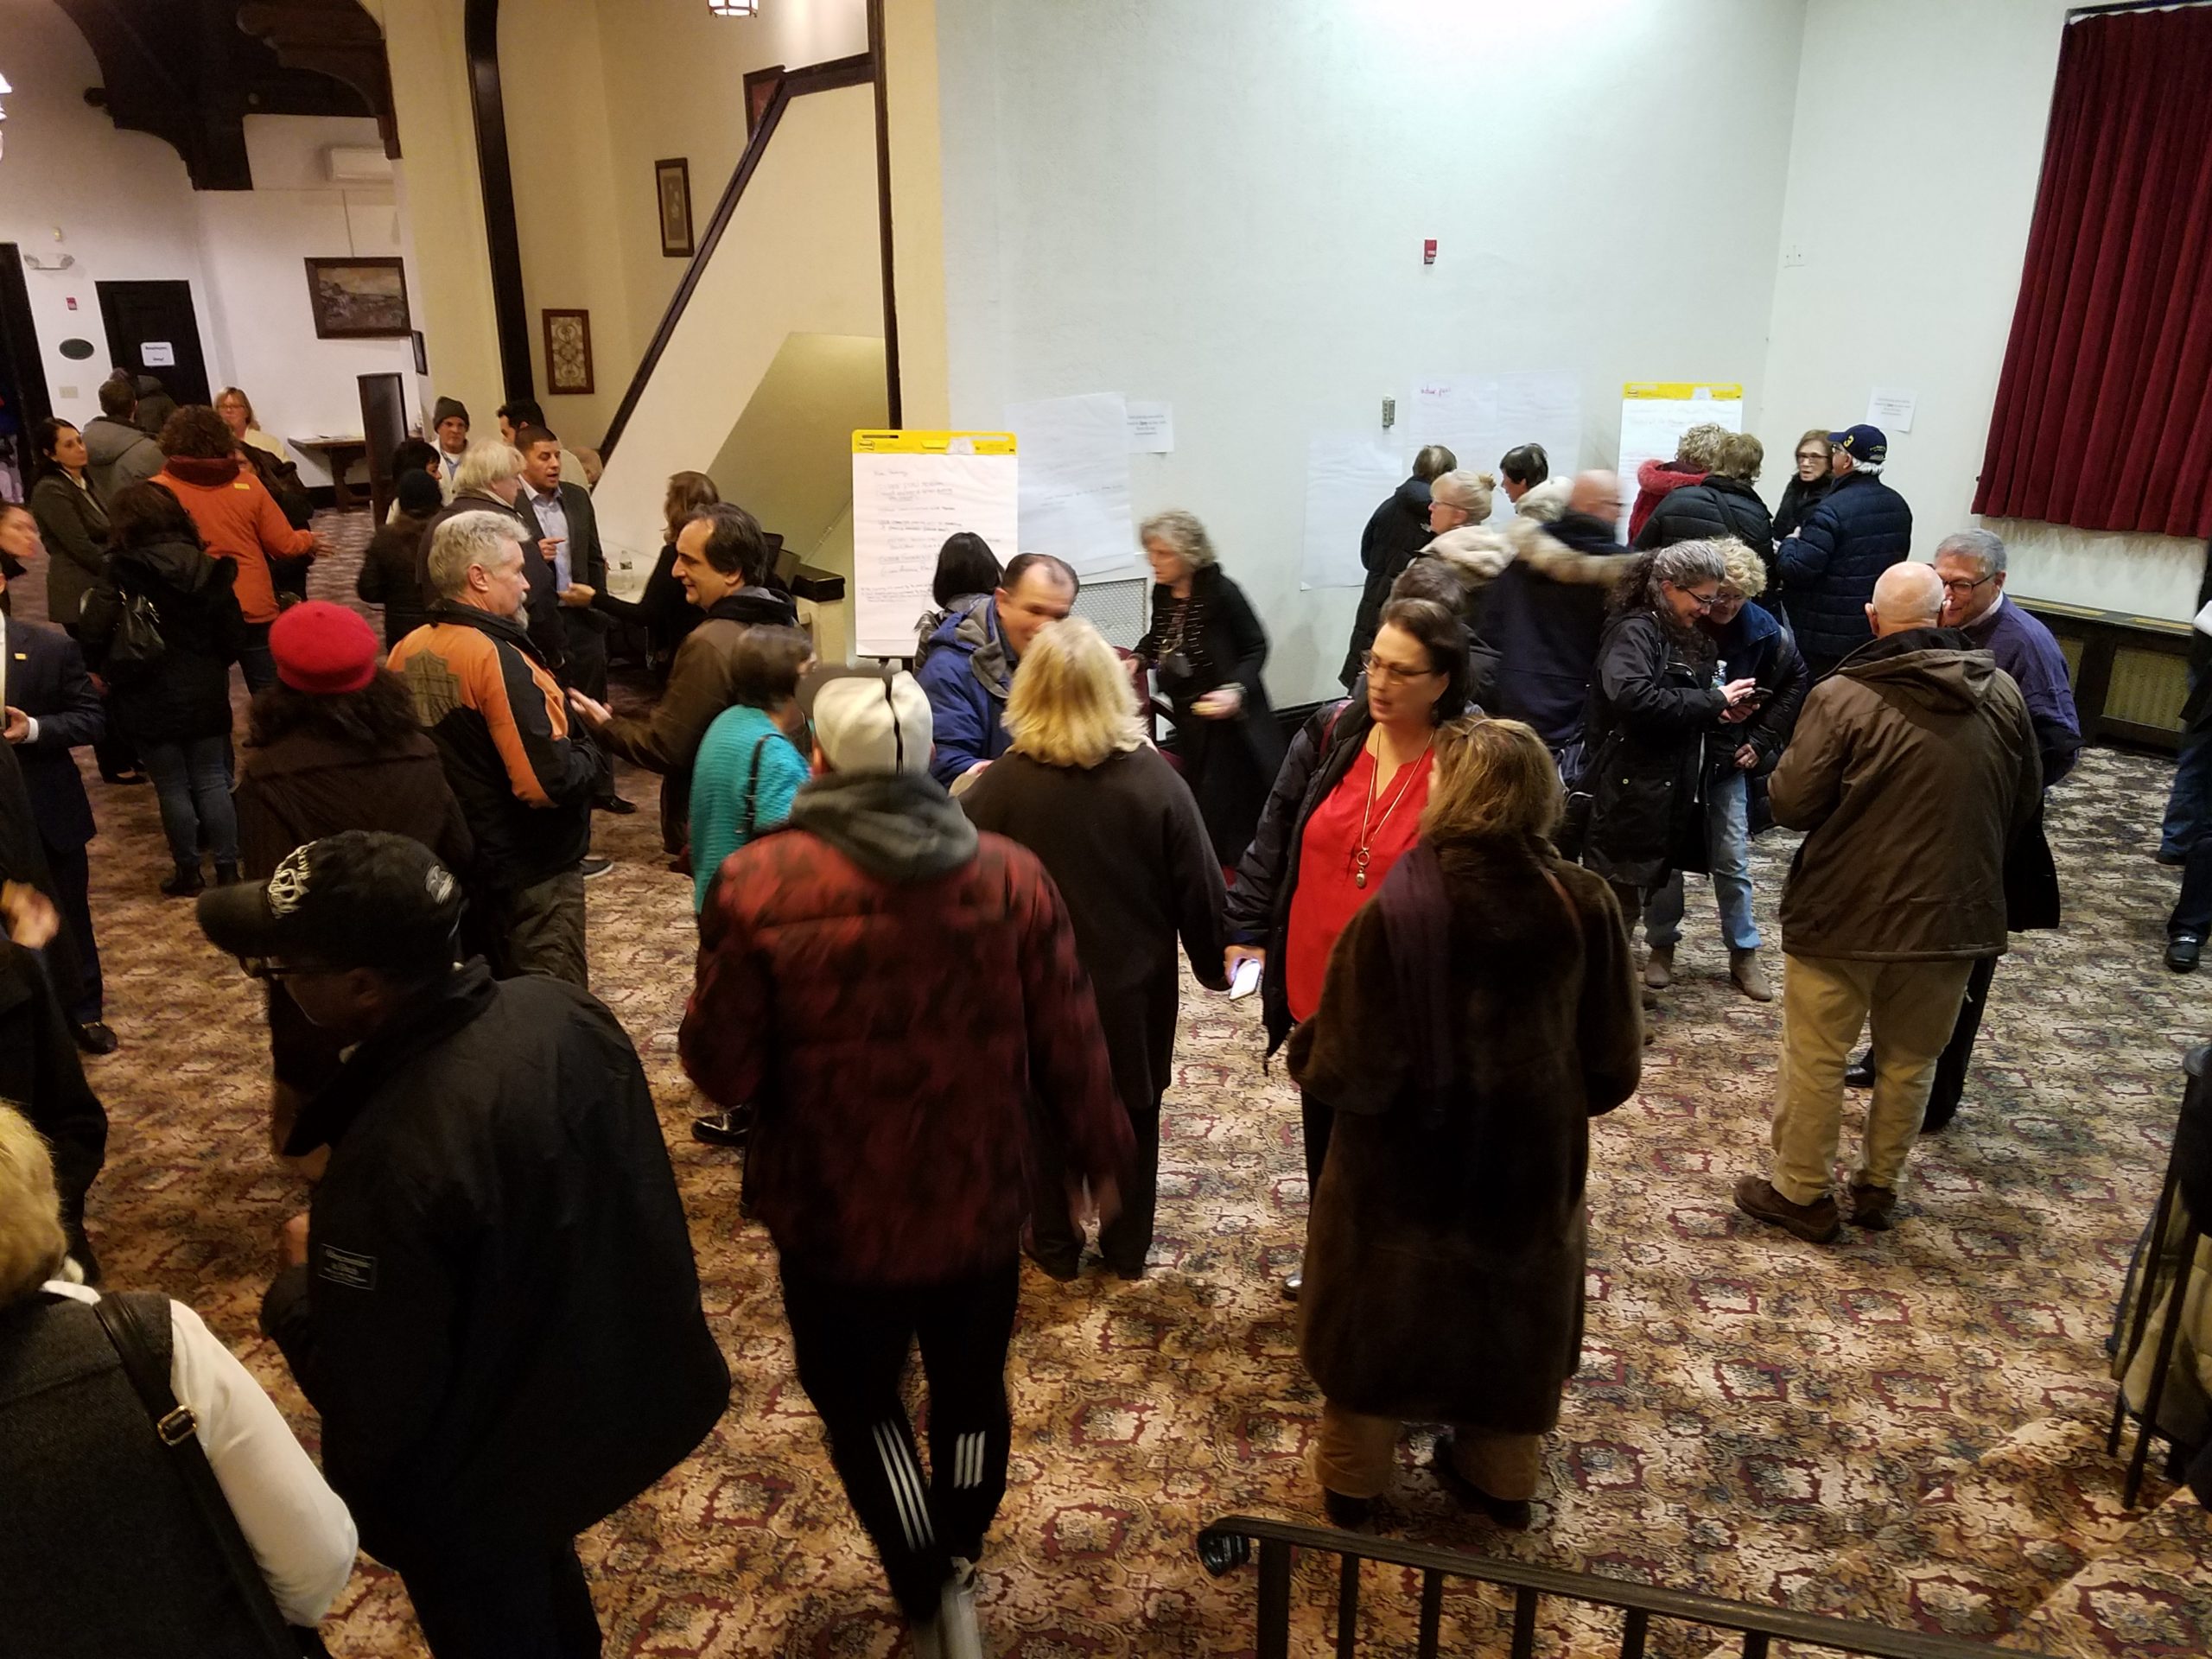 Dozens of residents attended a meeting about the Great Neck Park District's new master plan on Thursday night. (Photo by Janelle Clausen)